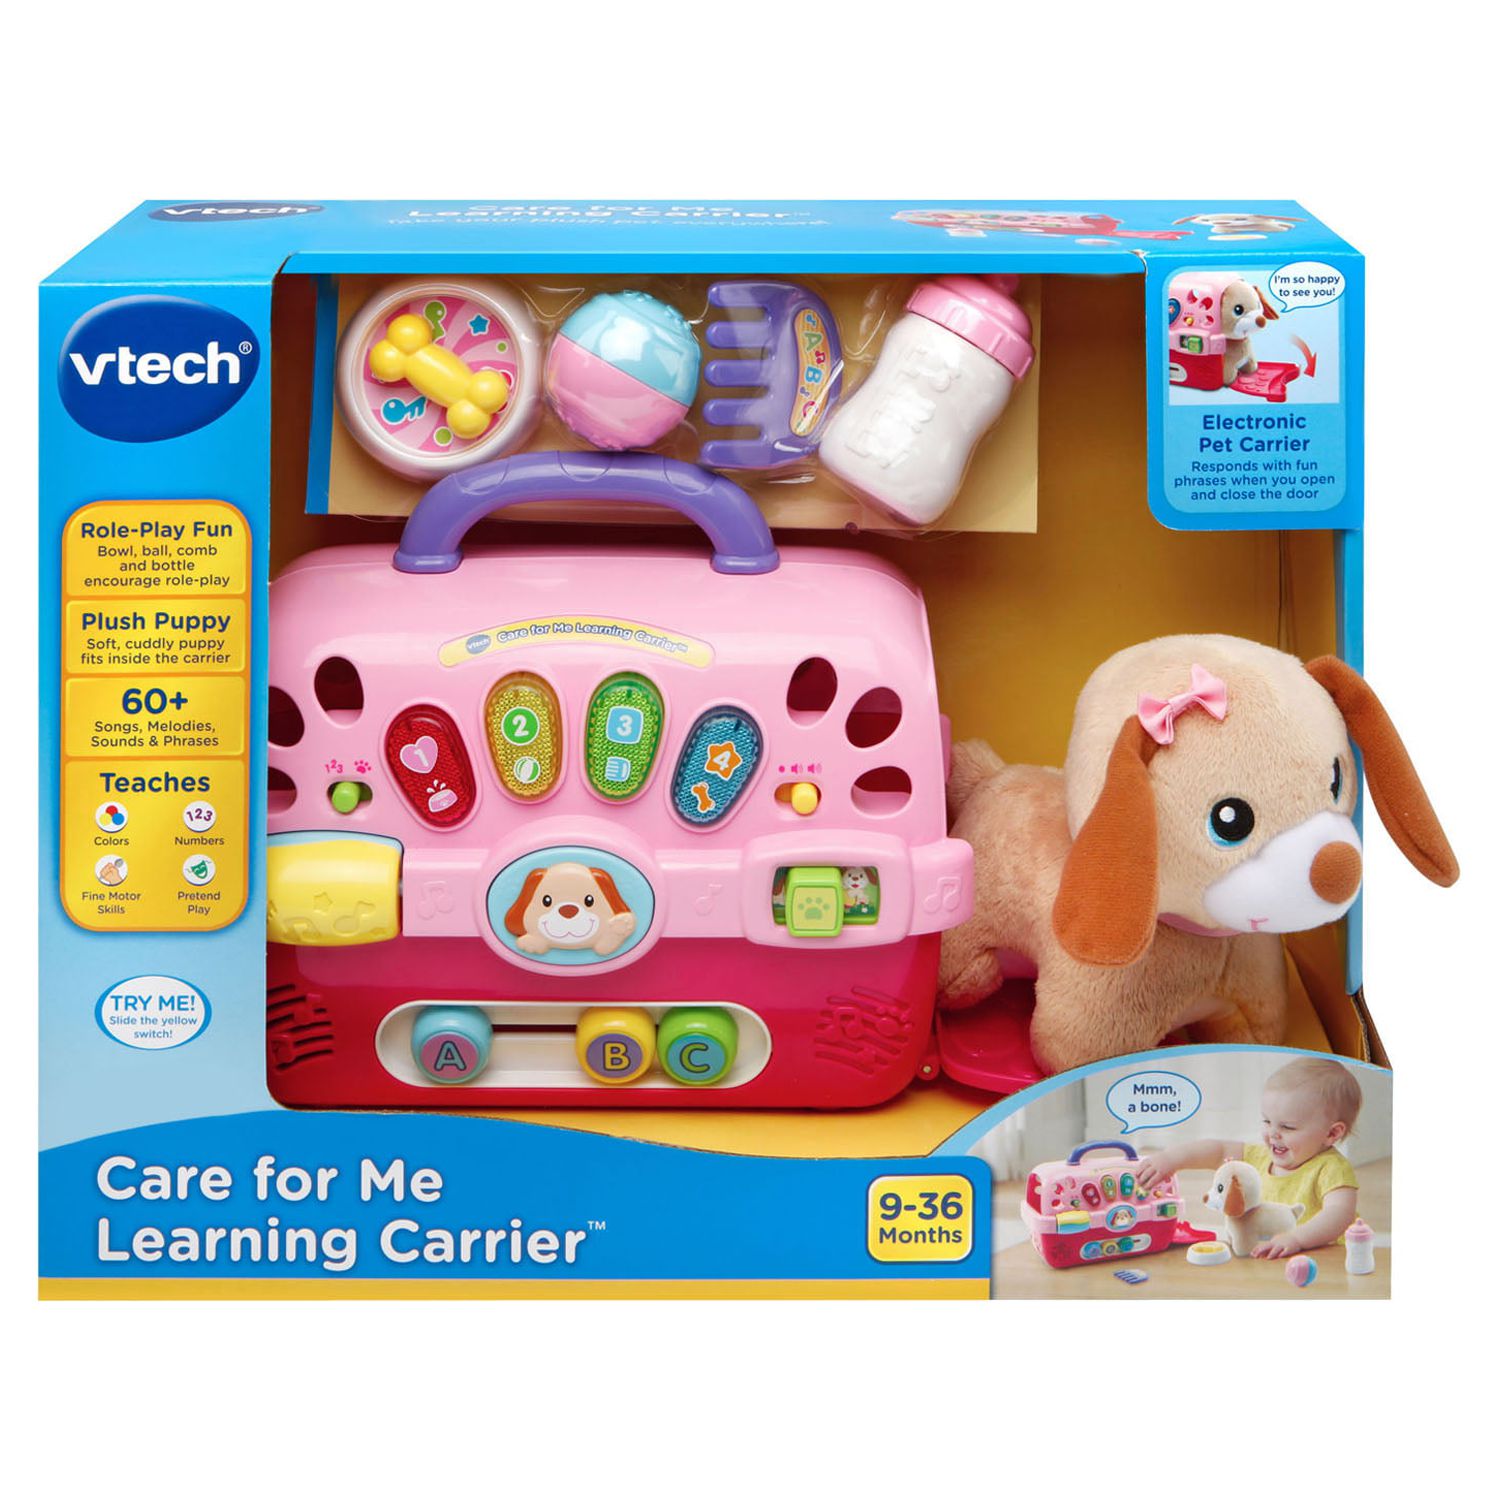 VTech, Care for Me Learning Carrier, Infant Learning, Role-Play Toy - image 7 of 9